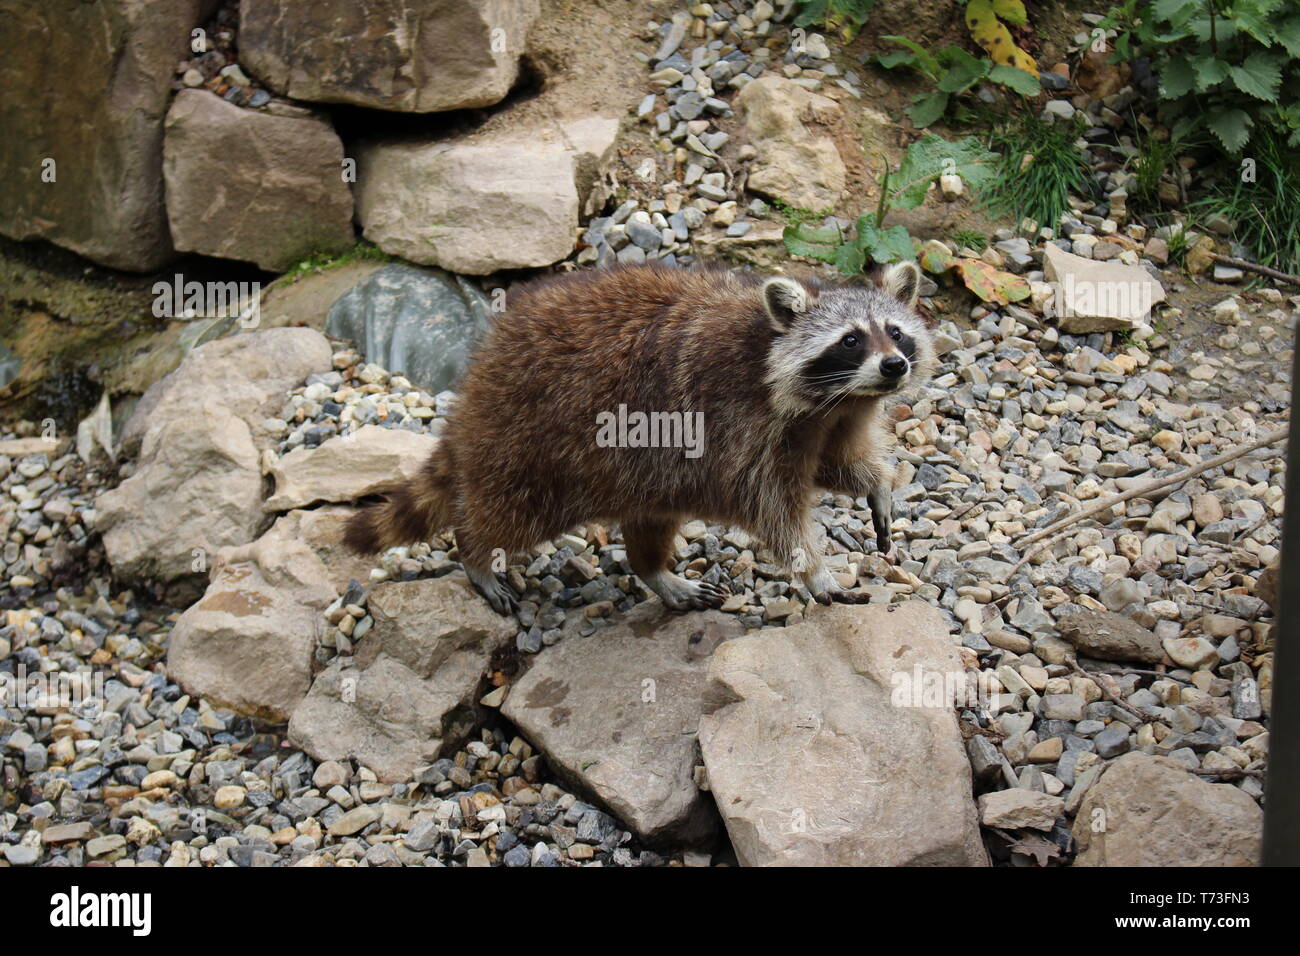 Raccoon HD Wallpaper Cute Nature Photography Raccoon drinking water and climbing tree in zoo in Germany Background Image Photo Picture Funny Animals Stock Photo